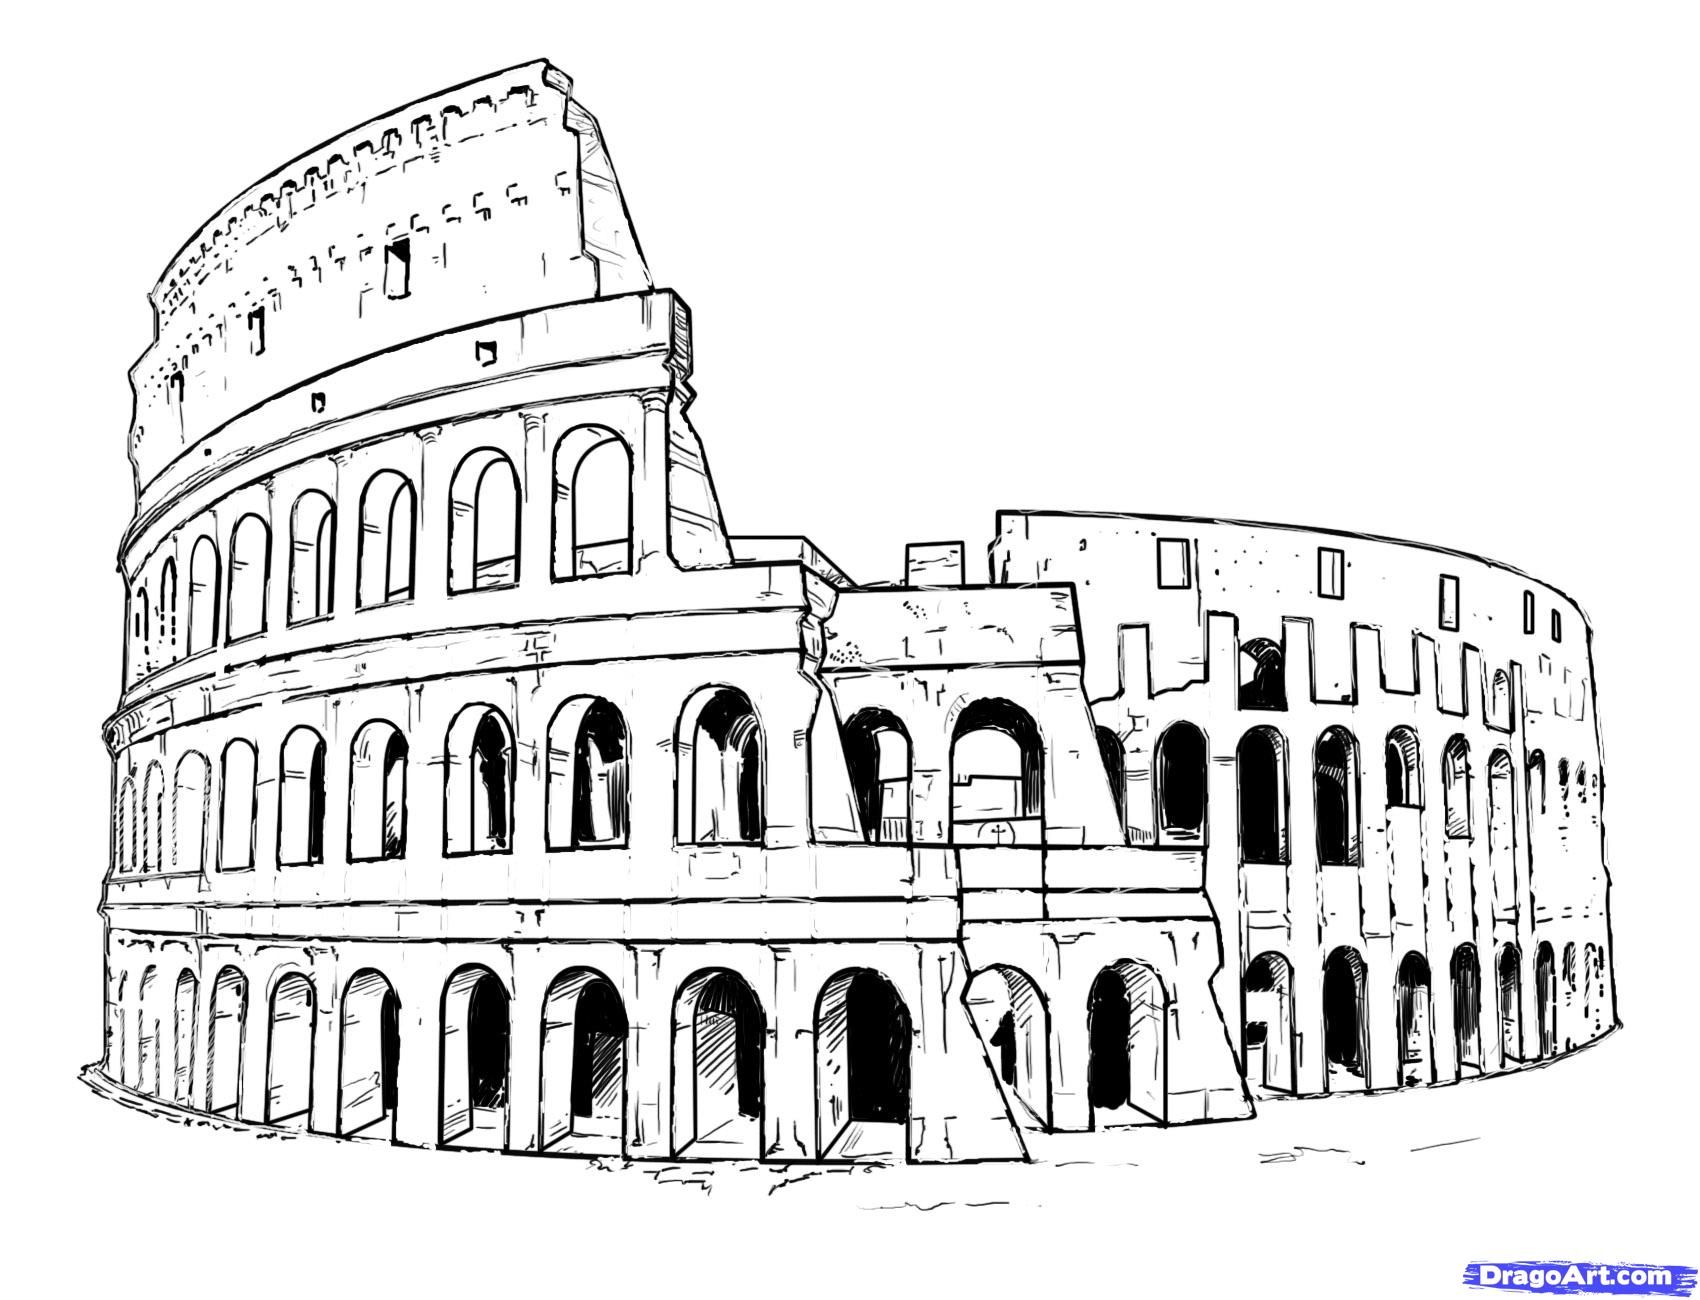 Colosseum Drawing